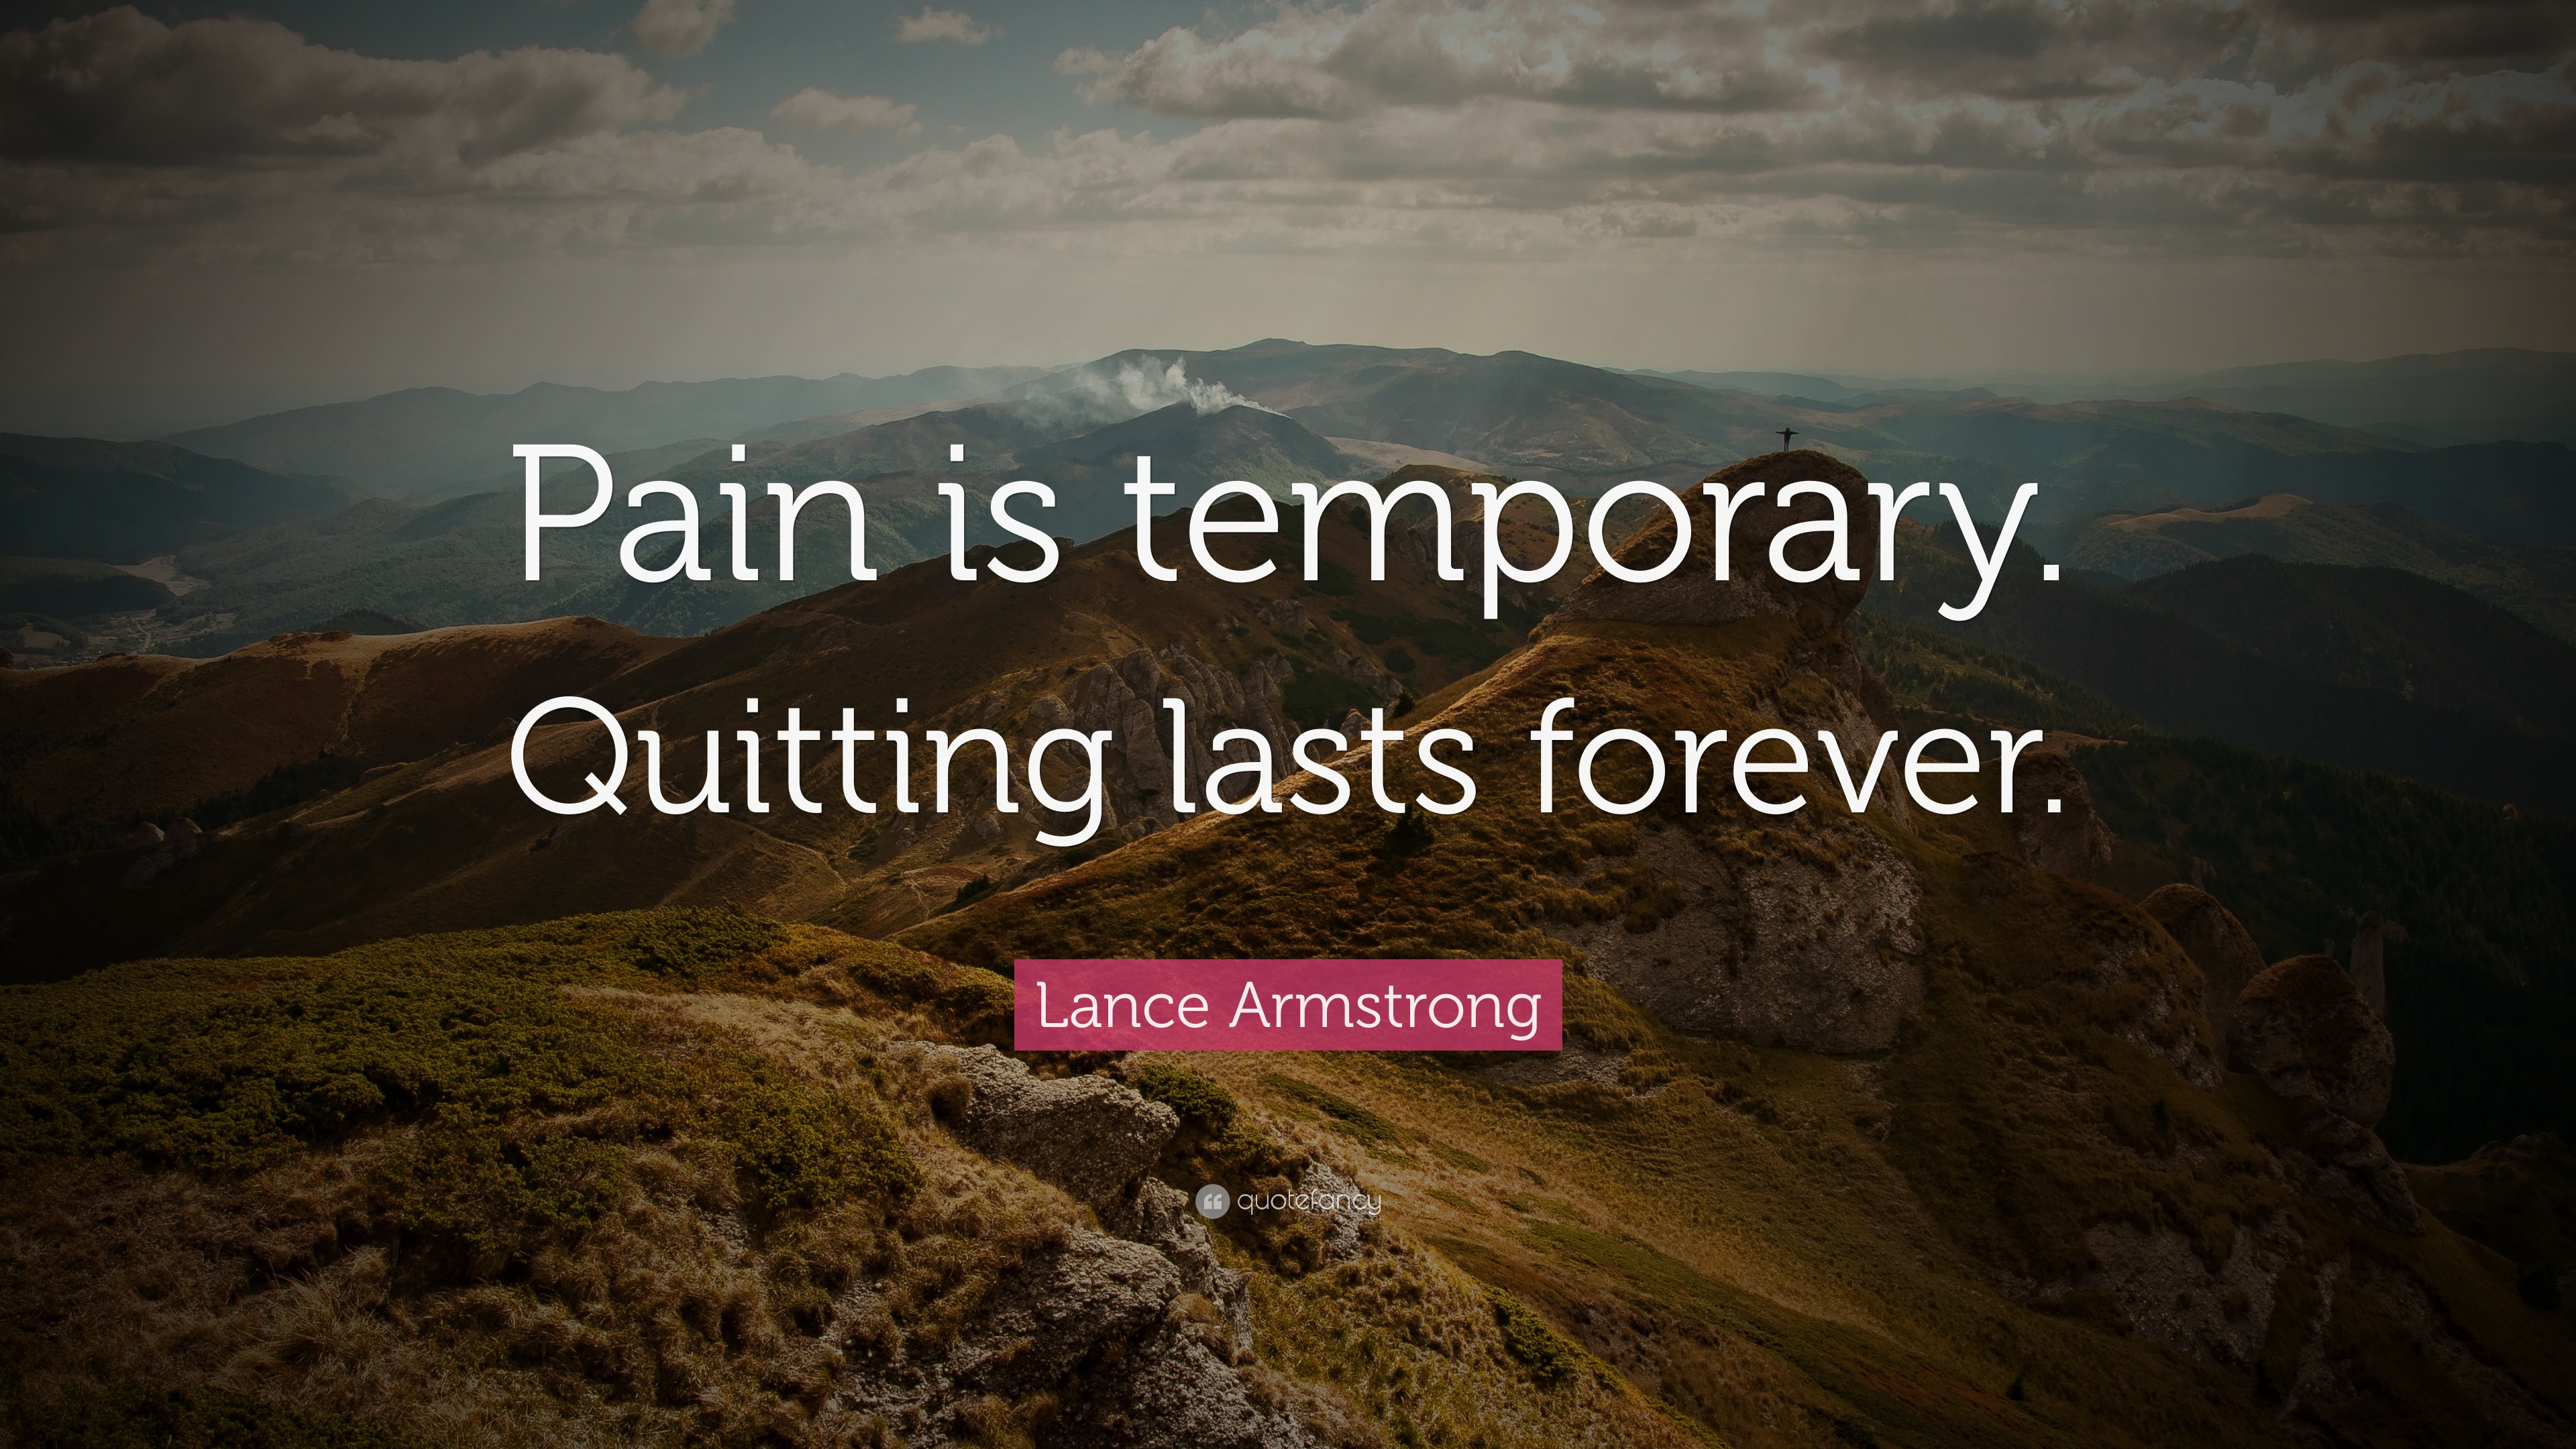 Lance Armstrong Quote “Pain is temporary. Quitting lasts